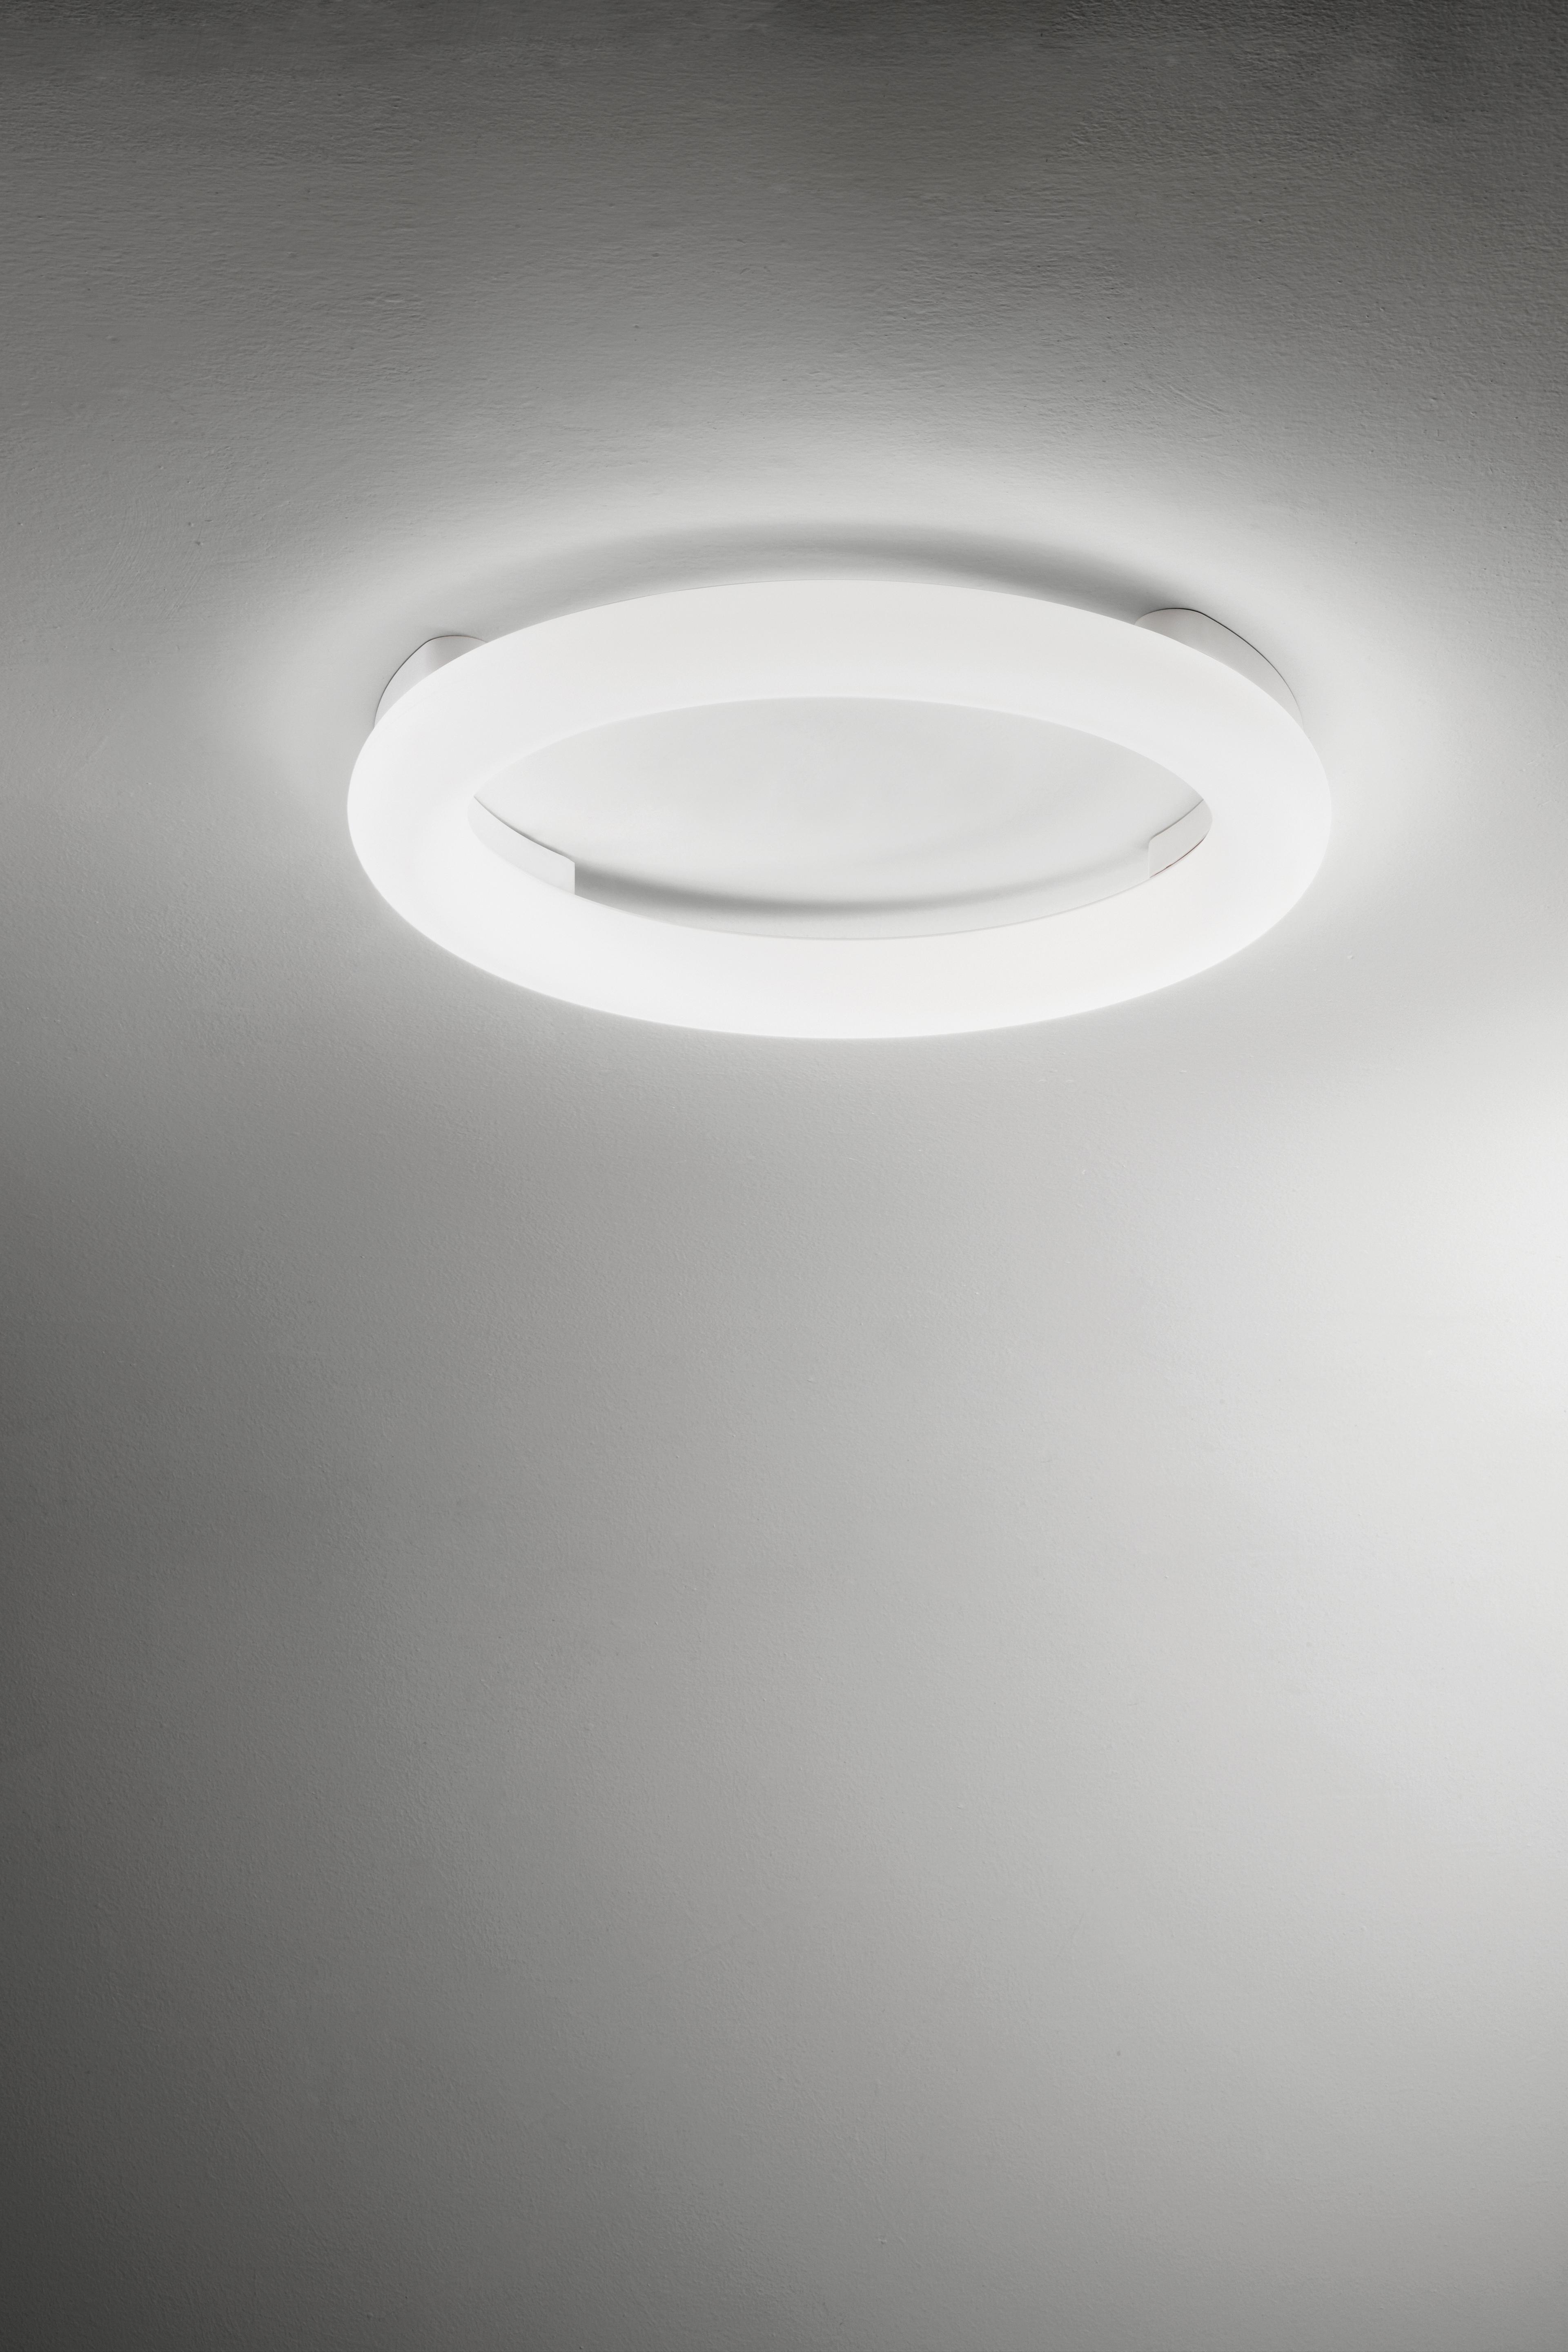 Gallery Product Polo Ceiling Linealightgroup 1280X1920 3